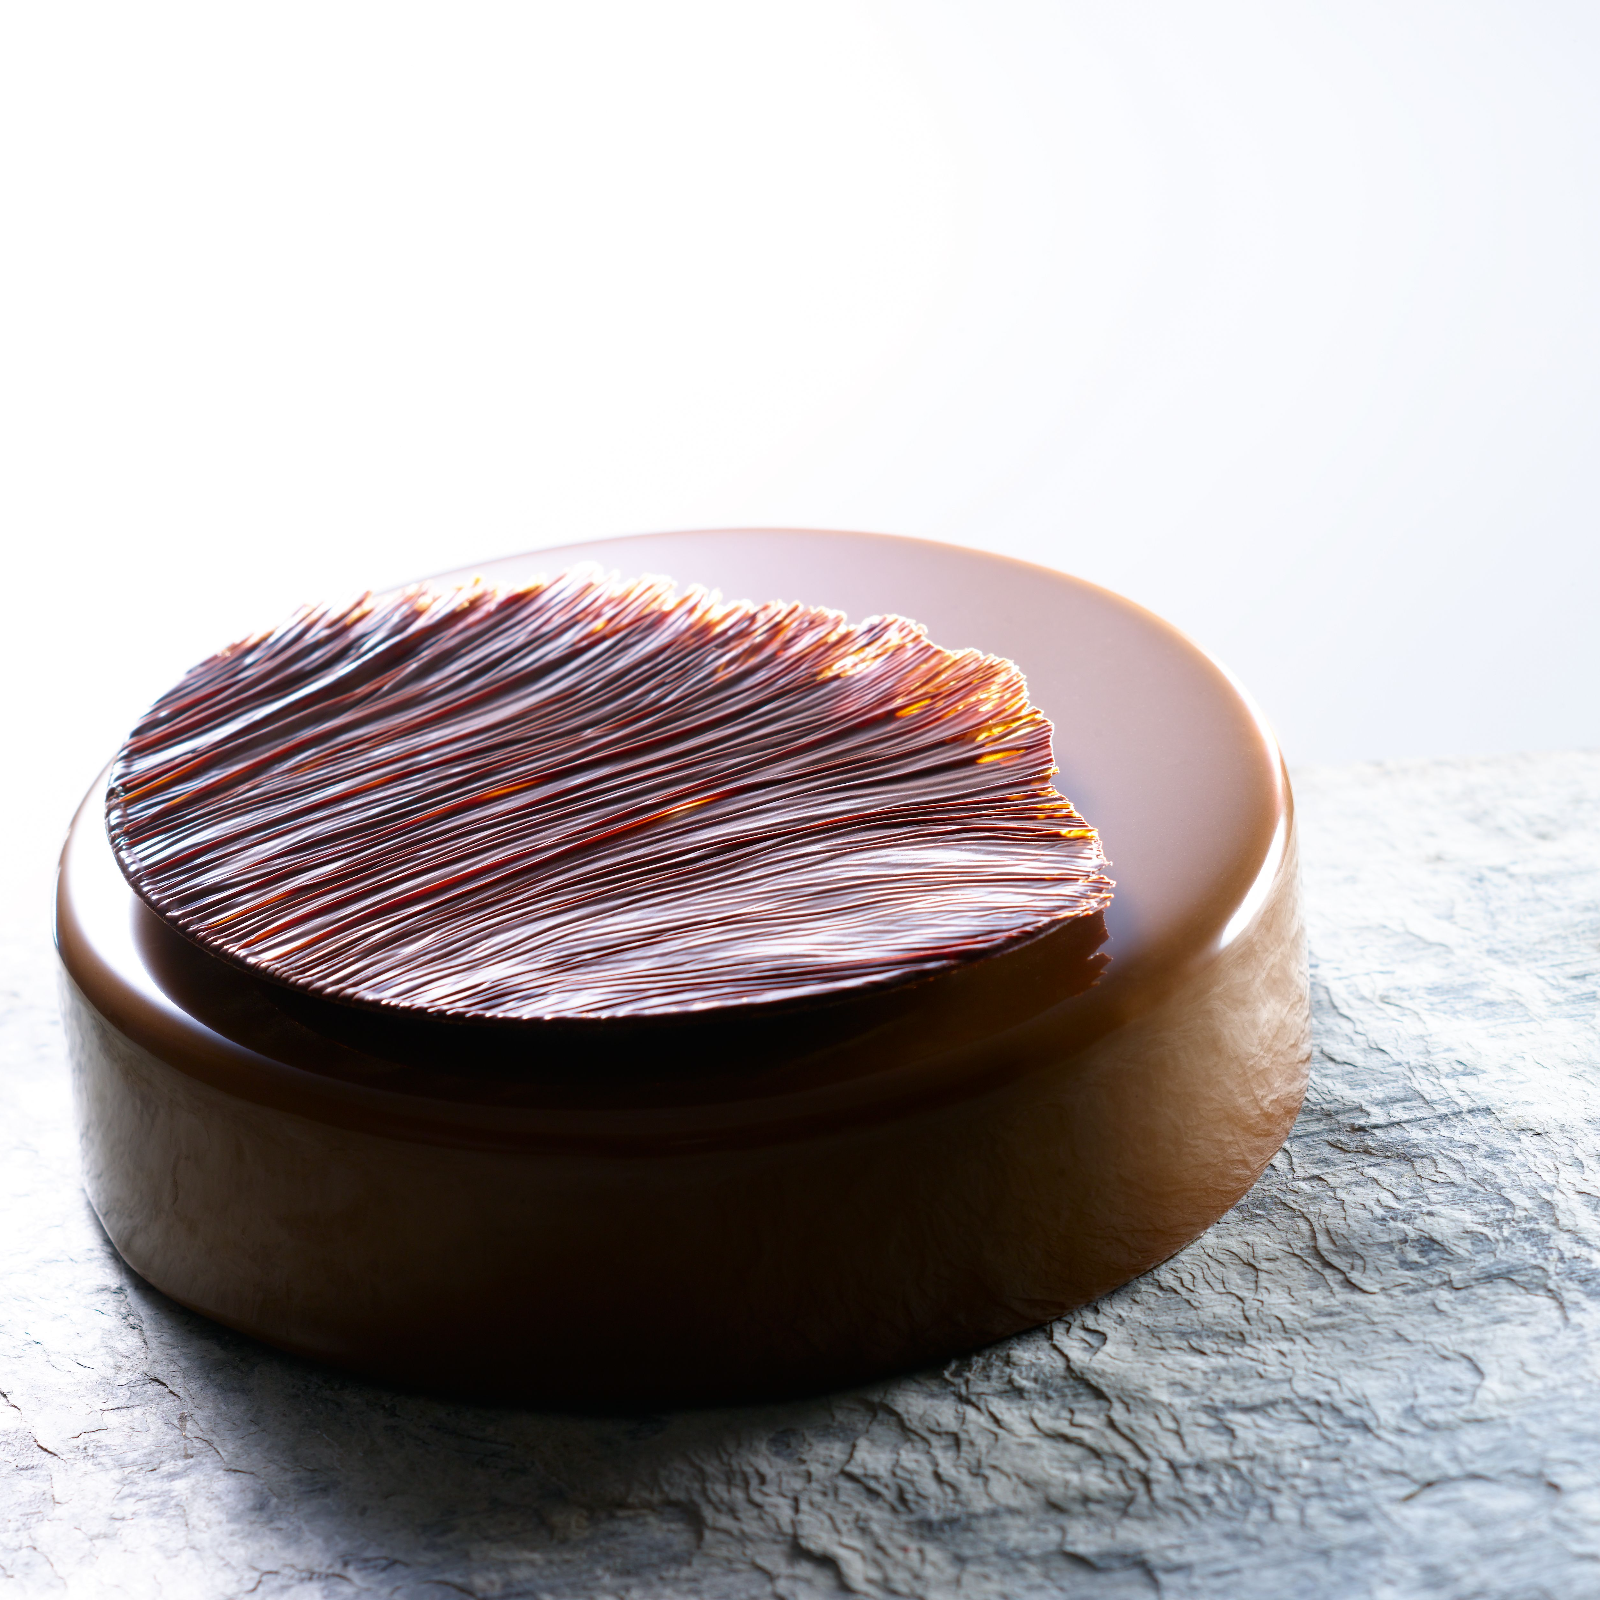 Belcolade, one chocolate, endless possibilities